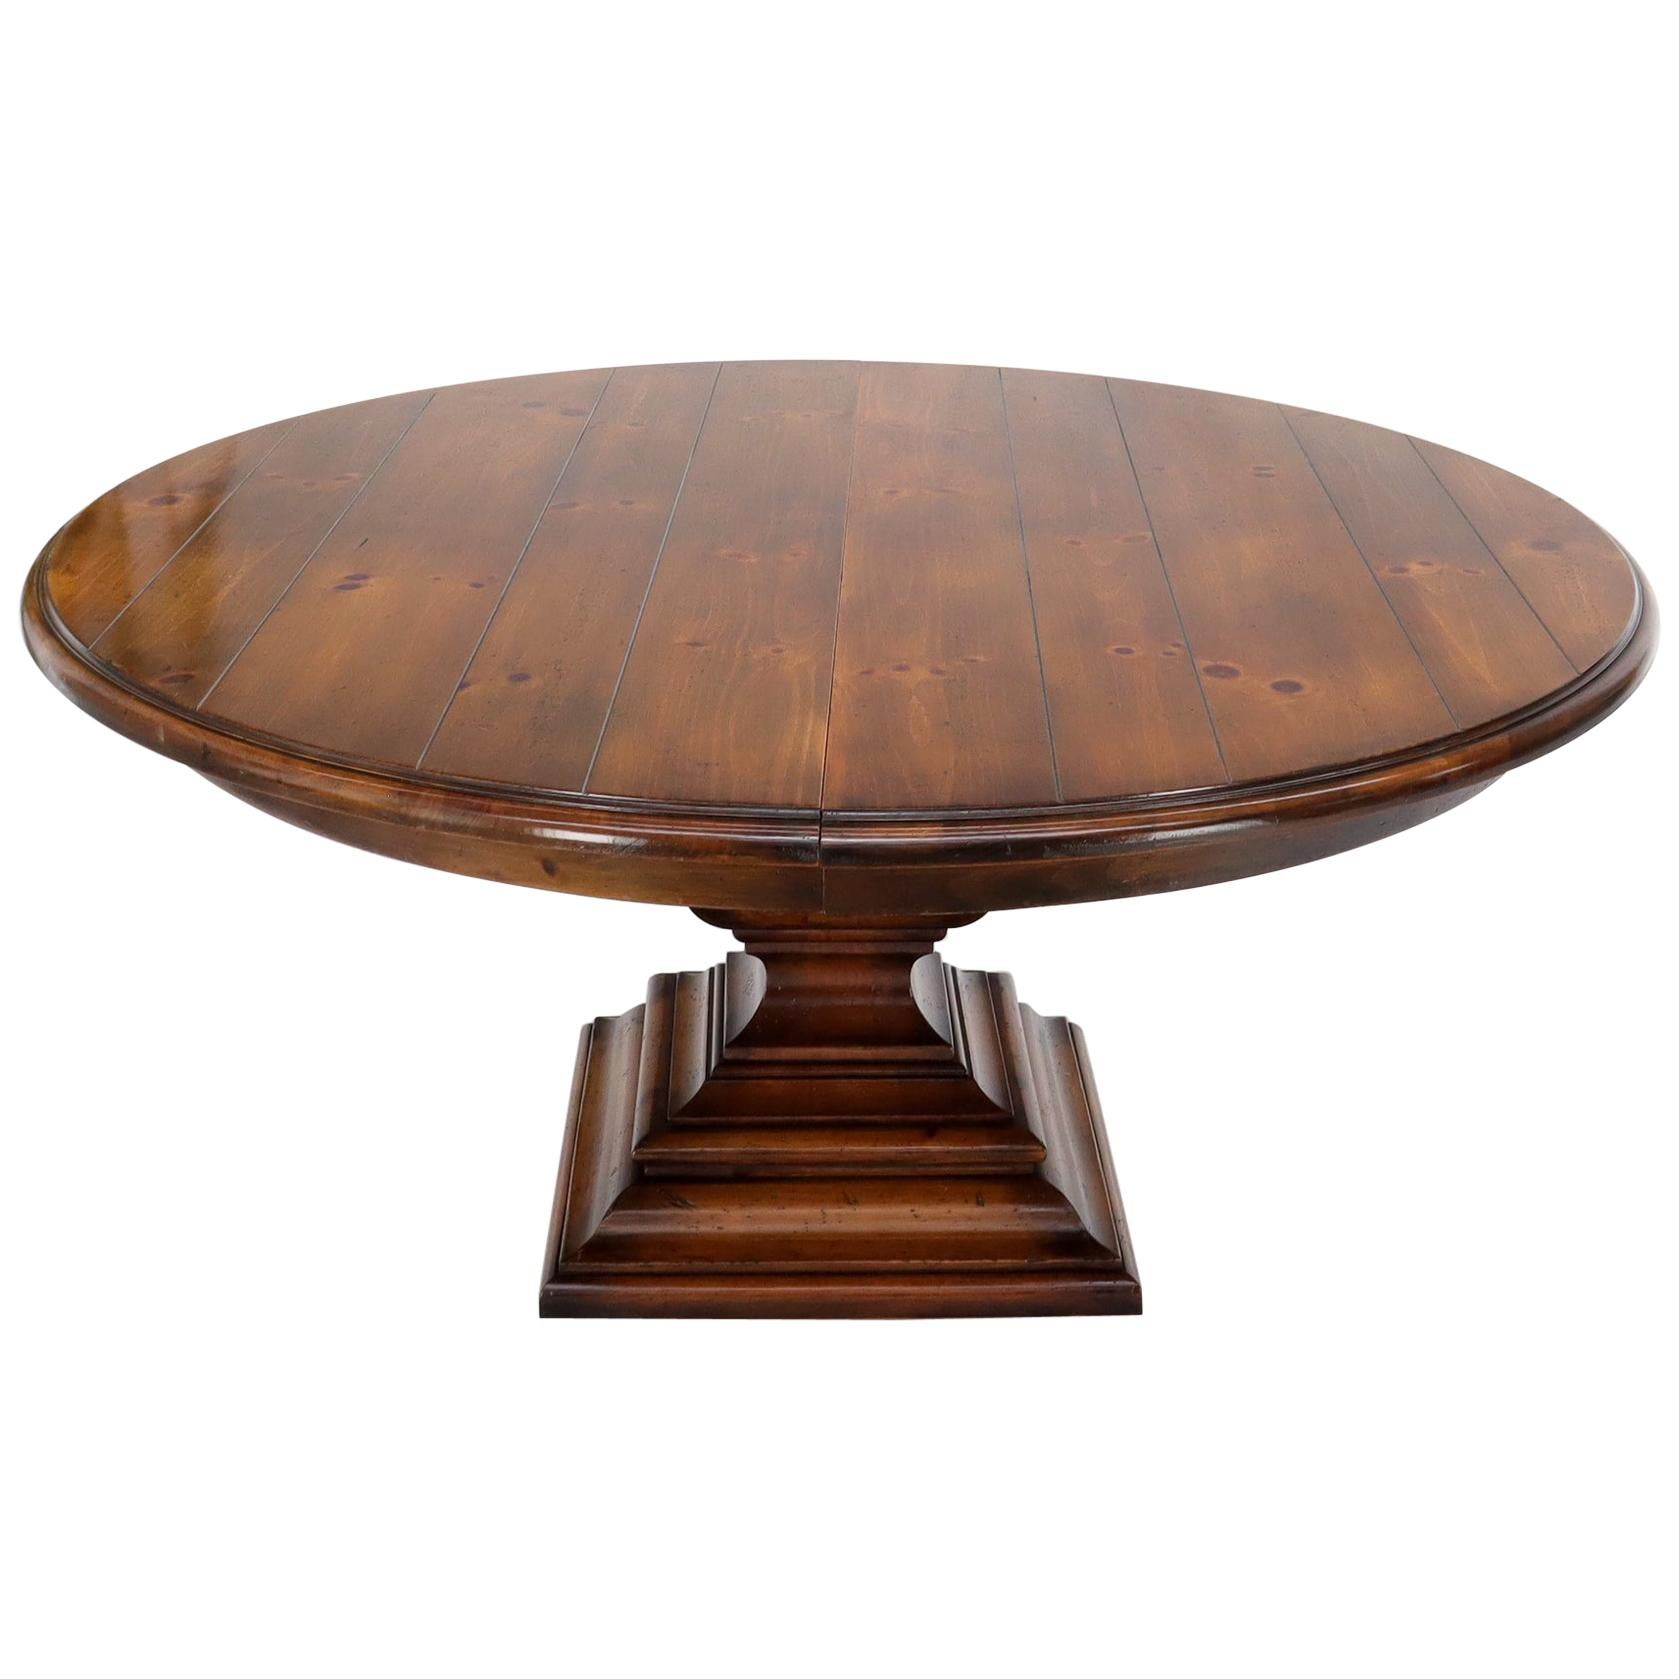 Large Round Colonial Spanish Square Base Pine Dining Table by Ralph Lauren